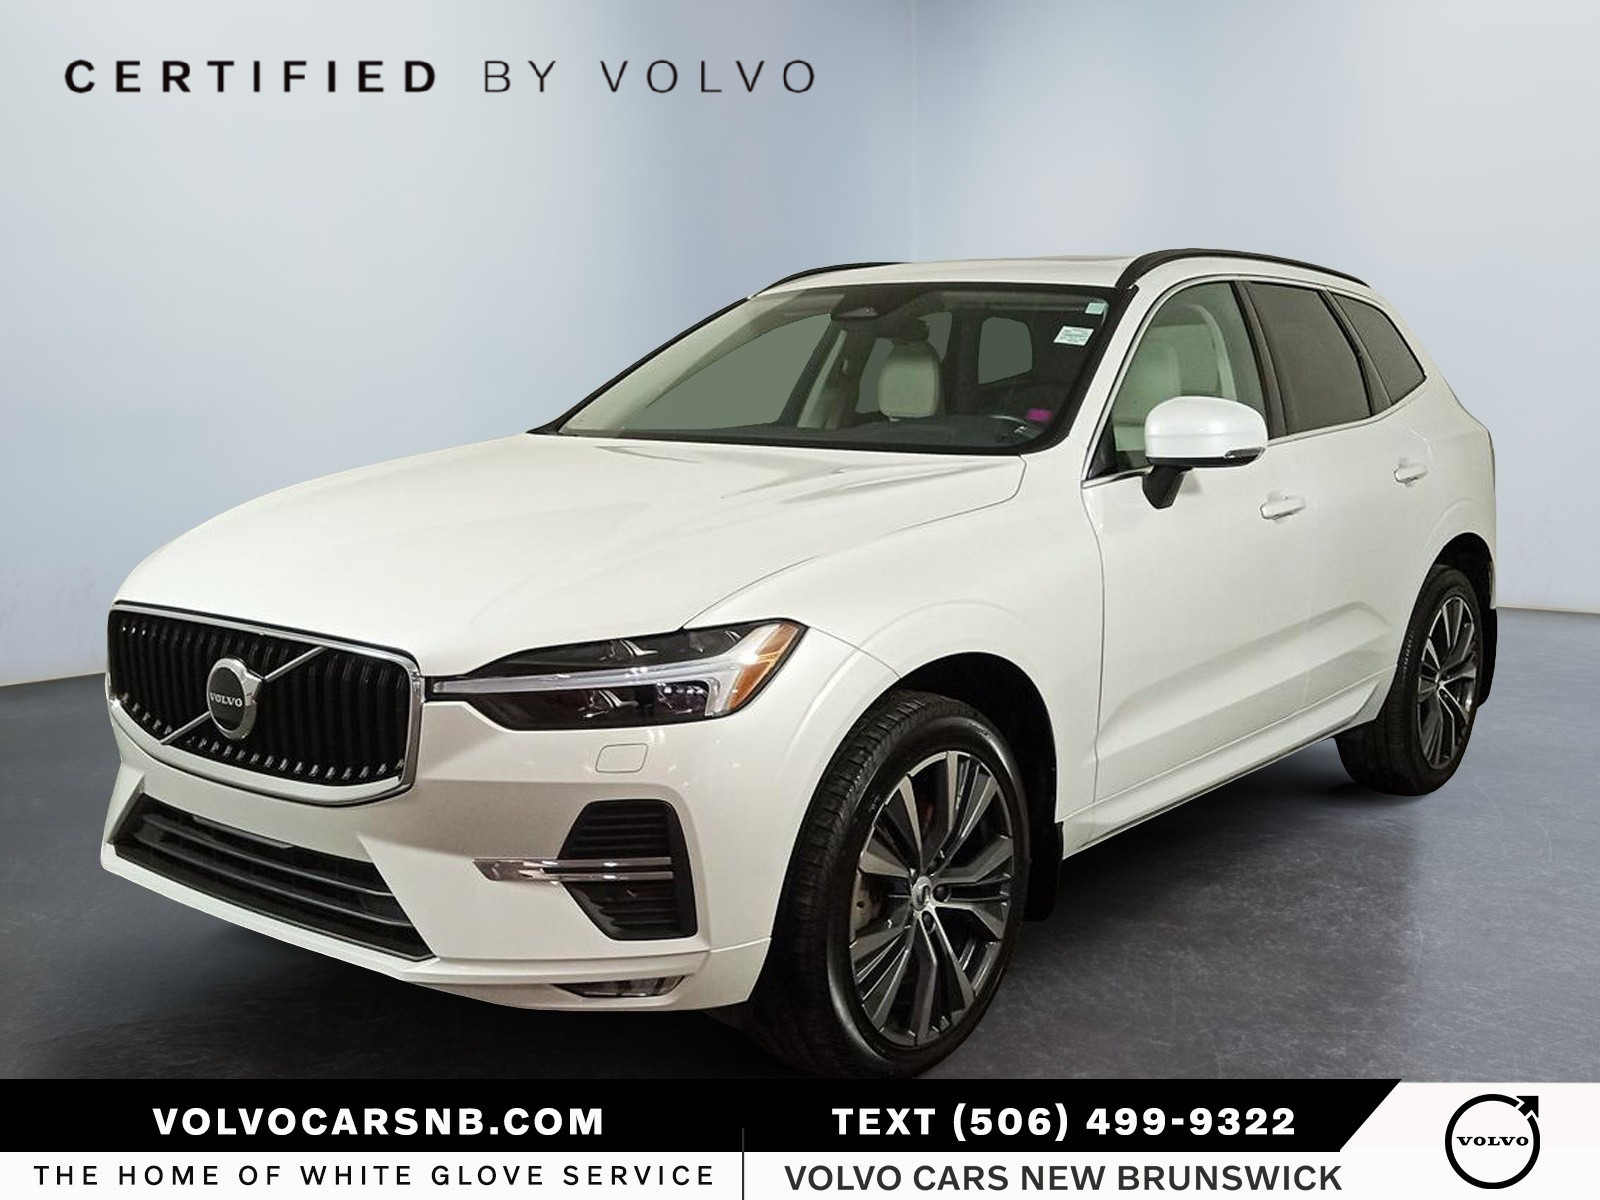 2022 Volvo XC60 AWD | Full Factory Extended Warranty to 160,000km!